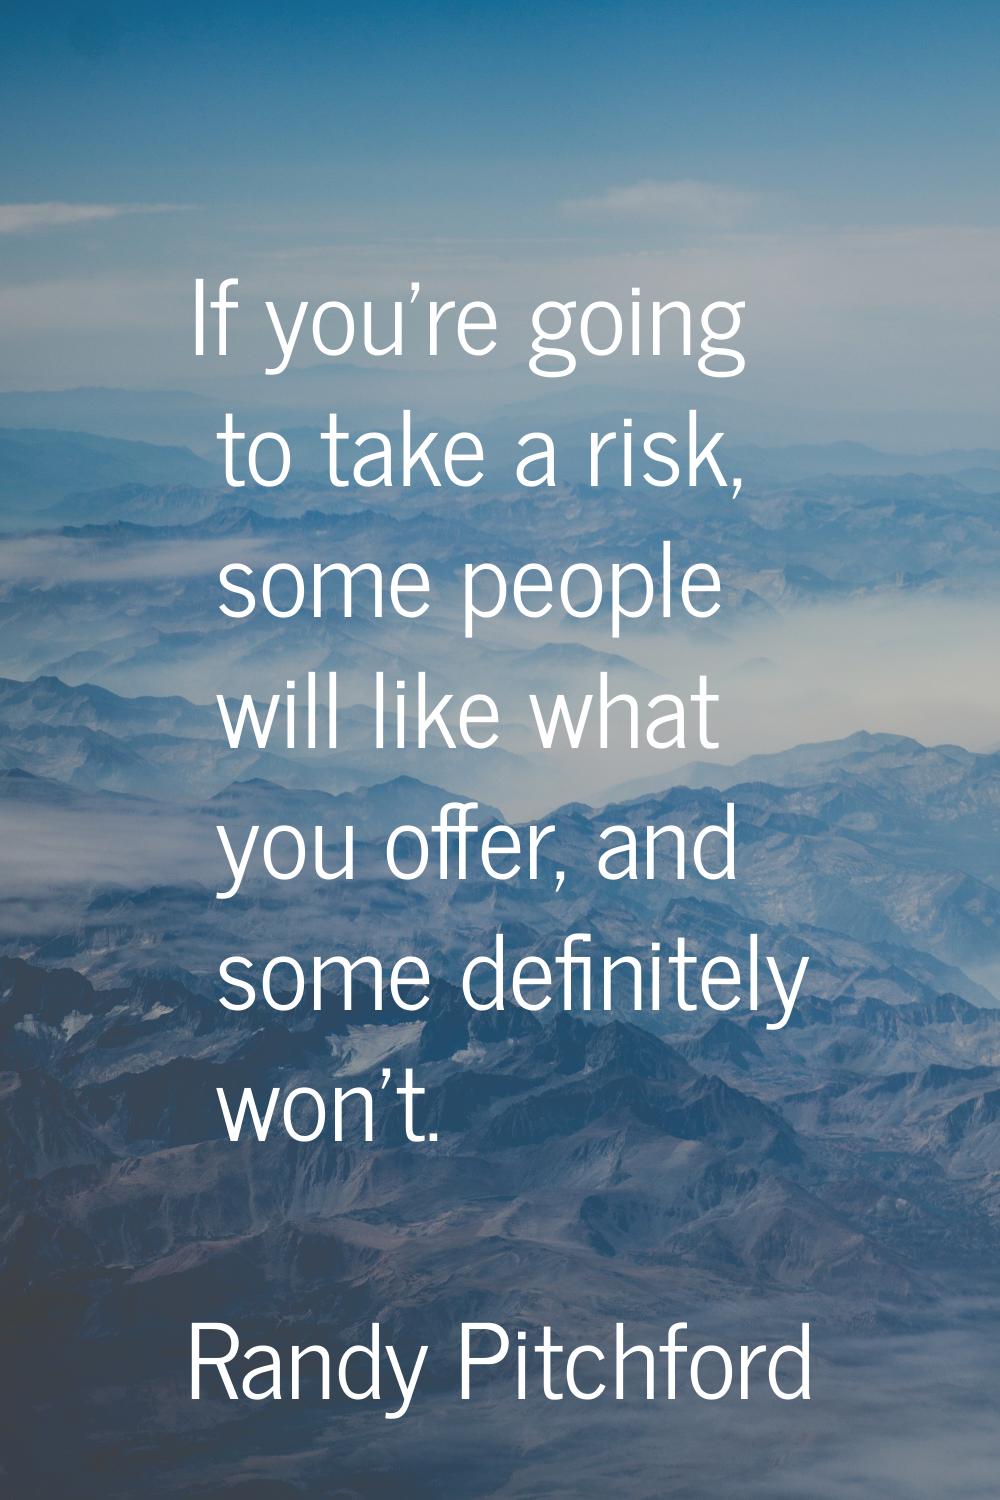 If you're going to take a risk, some people will like what you offer, and some definitely won't.